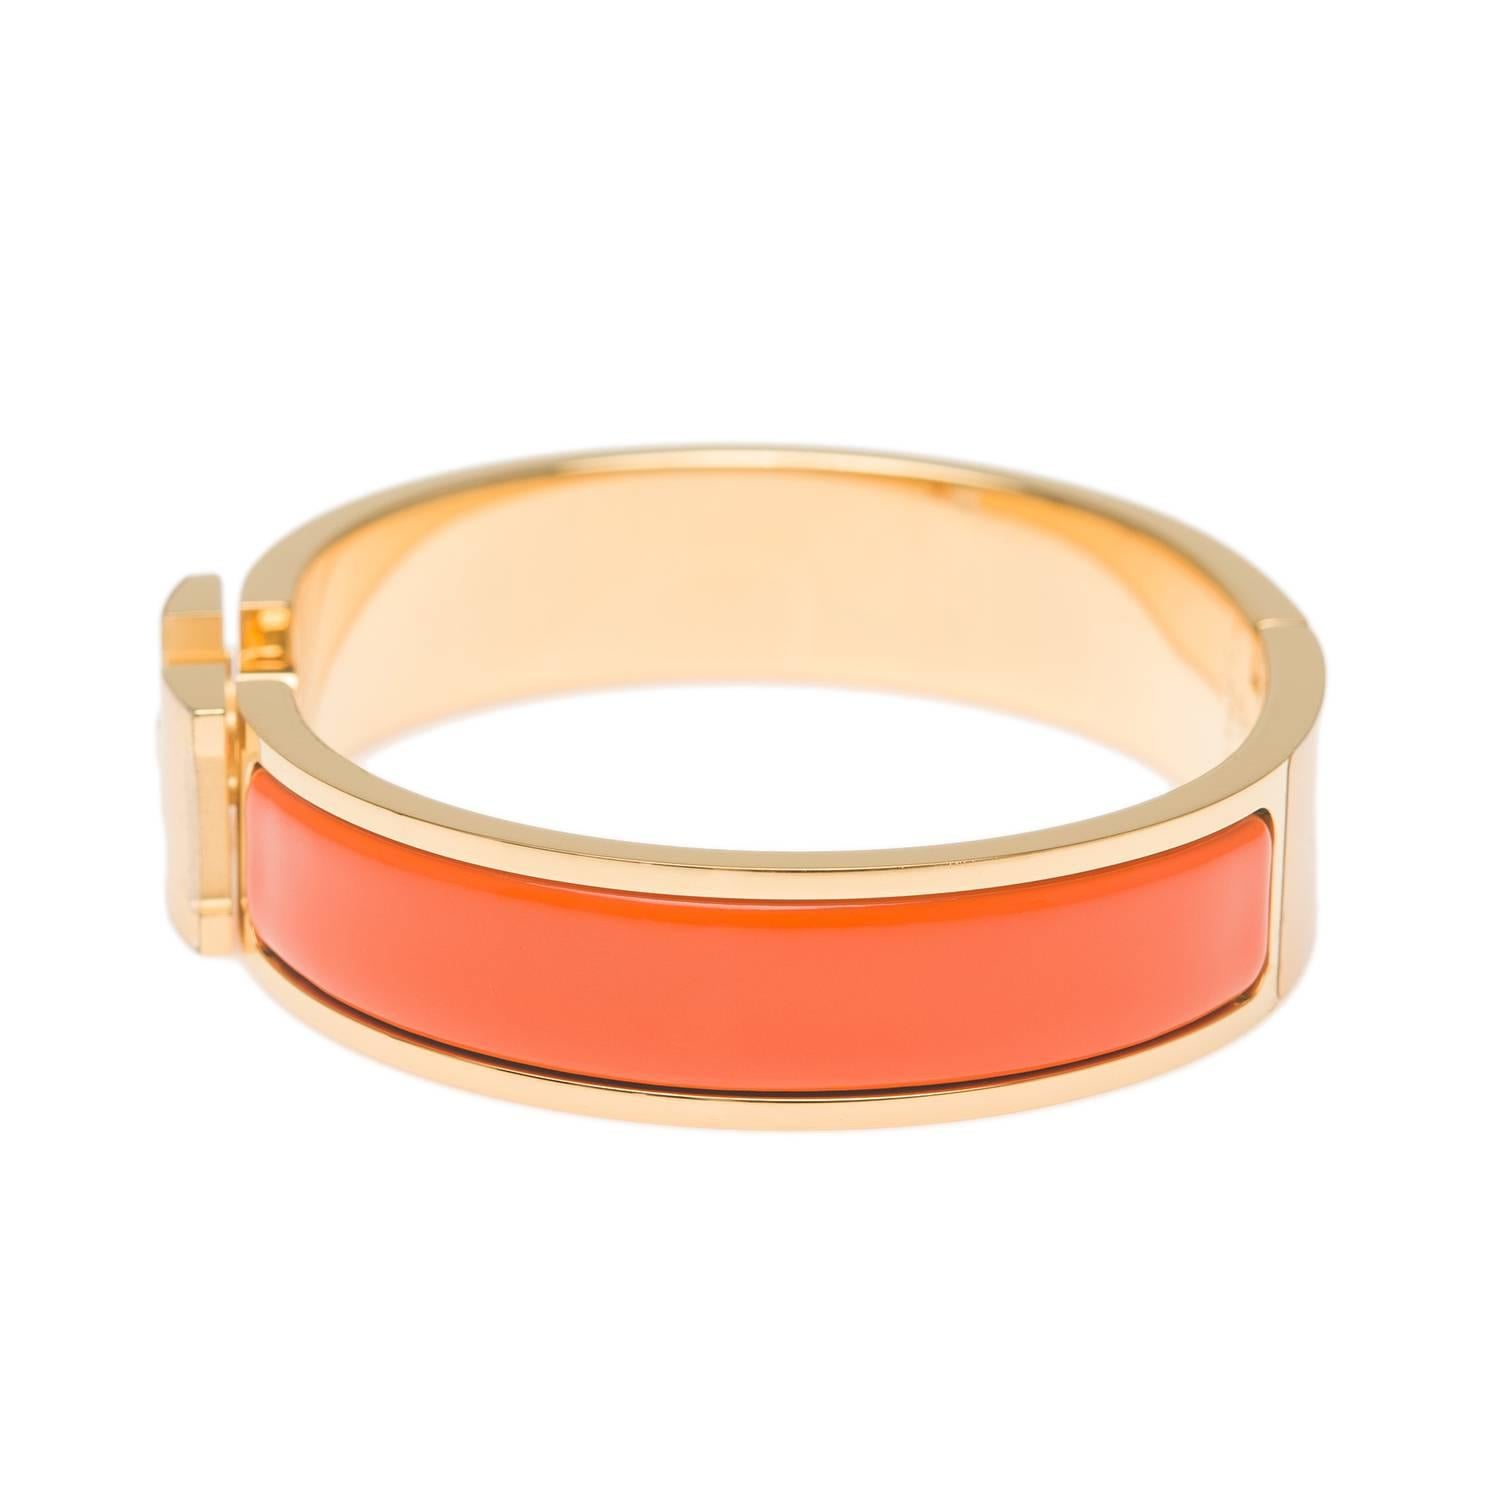 Hermes narrow Clic Clac H bracelet in Orange enamel closure with gold plated hardware in size PM.

Origin: France

Condition: Pristine; never worn

Accompanied by: Hermes box, Hermes dustbag, carebook

Measurements: Diameter: 2.25